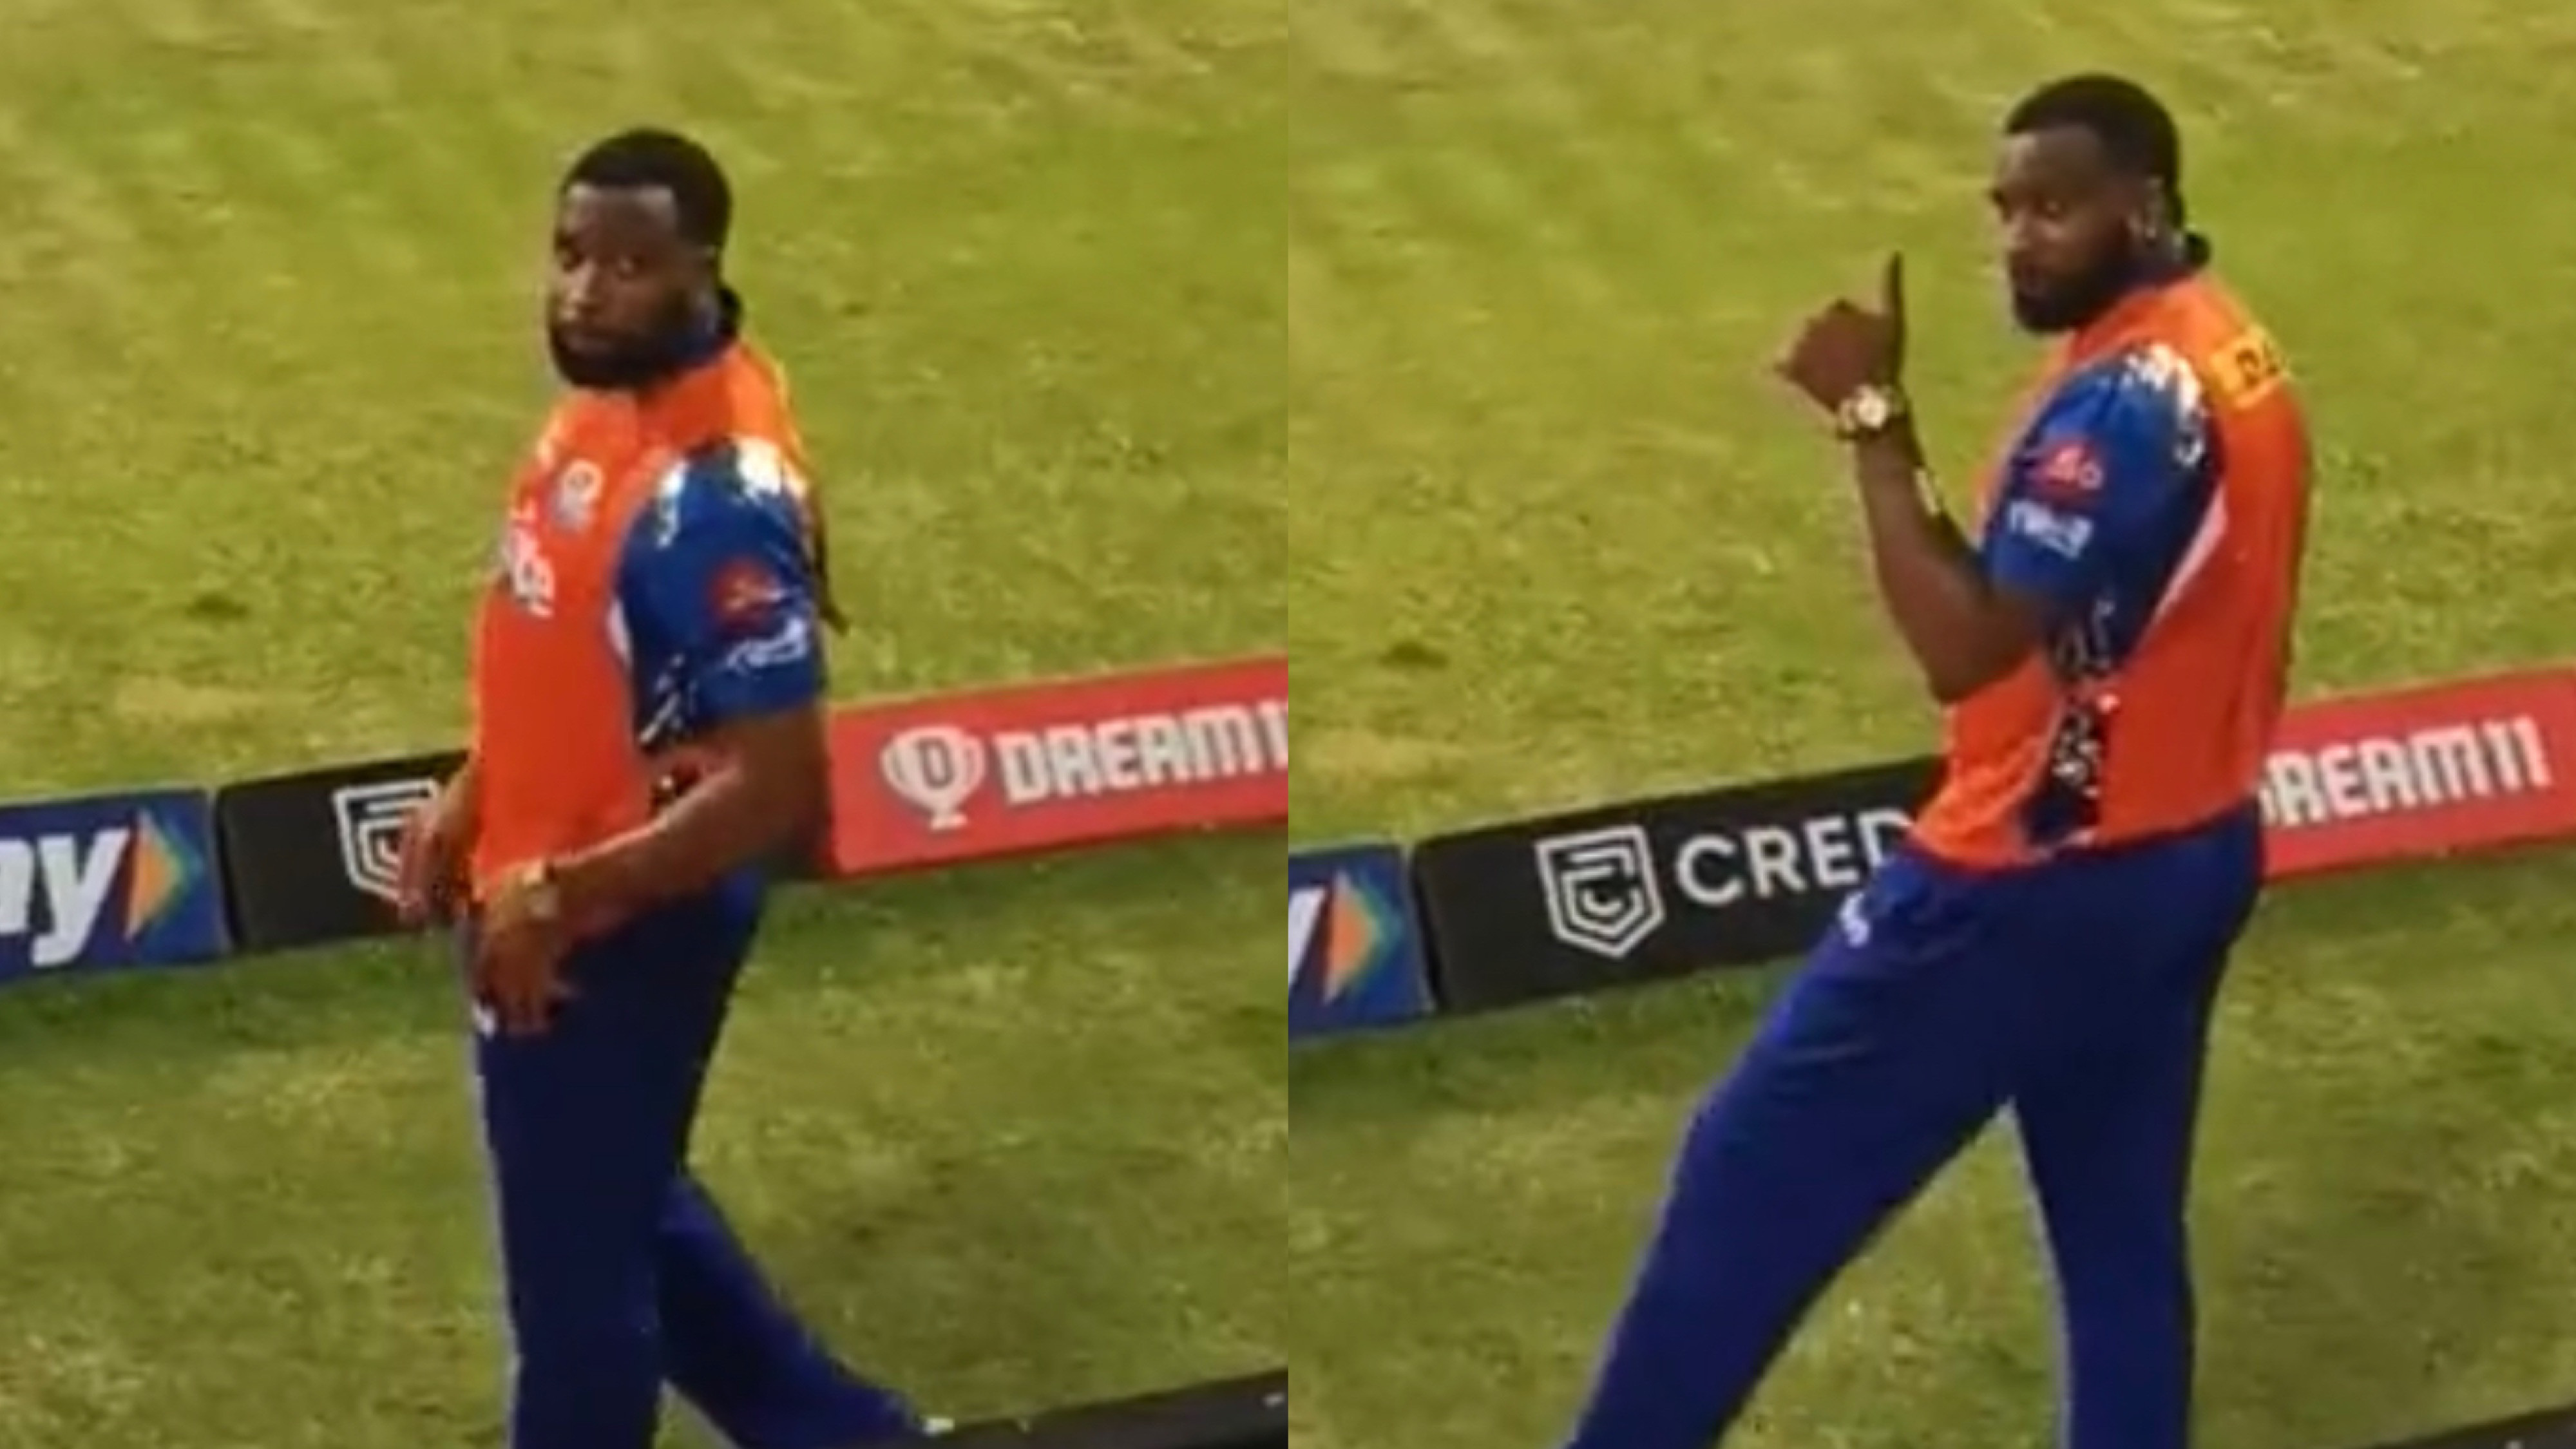 IPL 2022: WATCH - Pollard's reaction to fan shouting 'Polly, thank you for your contribution to Mumbai Indians'